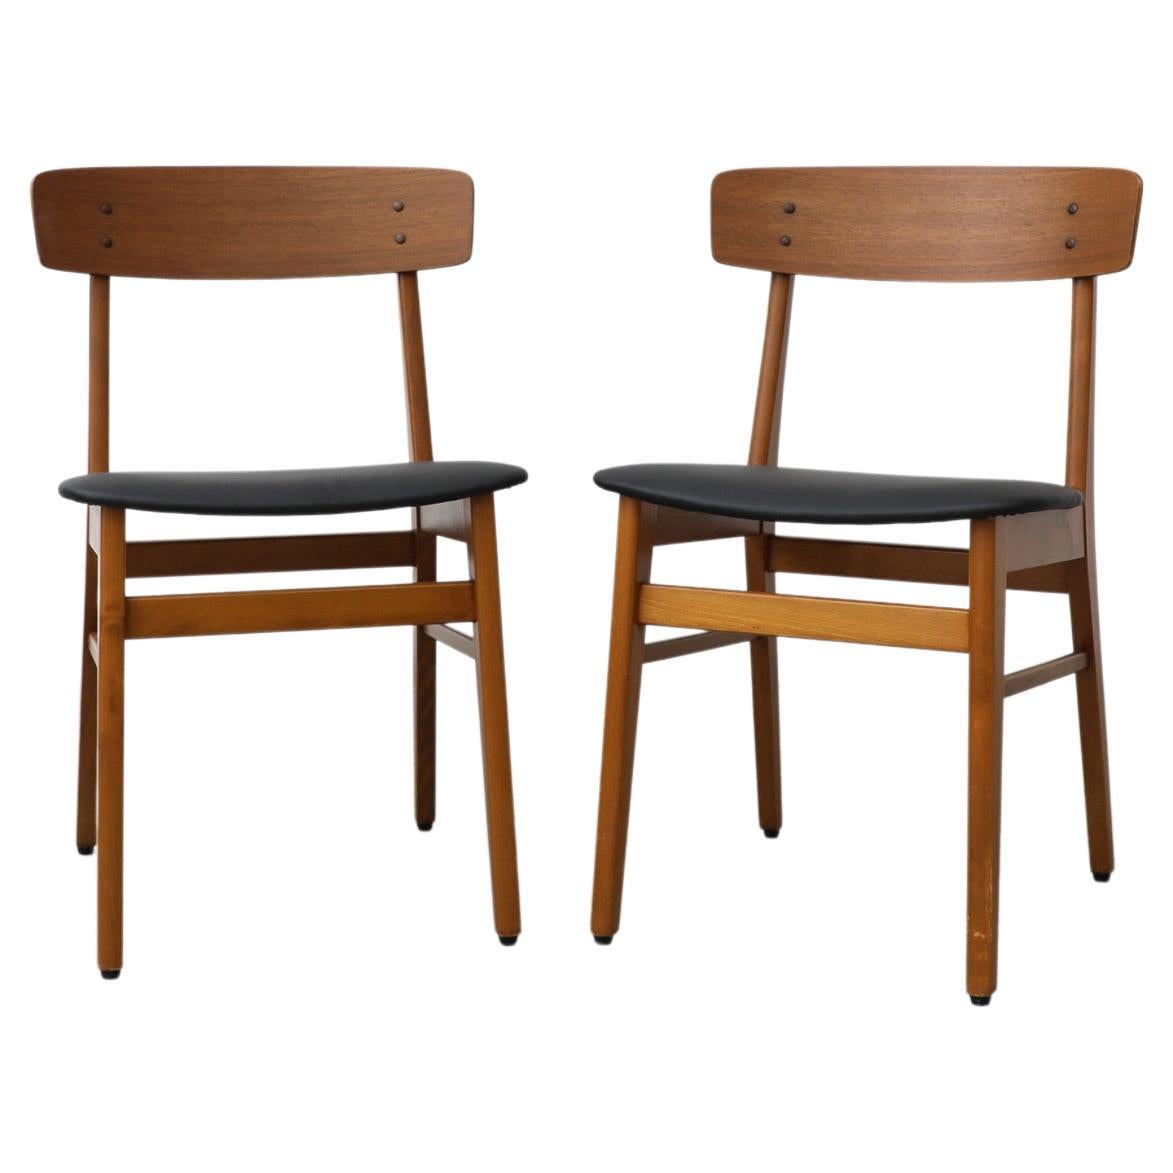 Pair of Borge Mogensen Style Danish Chairs by Farstrup with Black Skai Seats For Sale